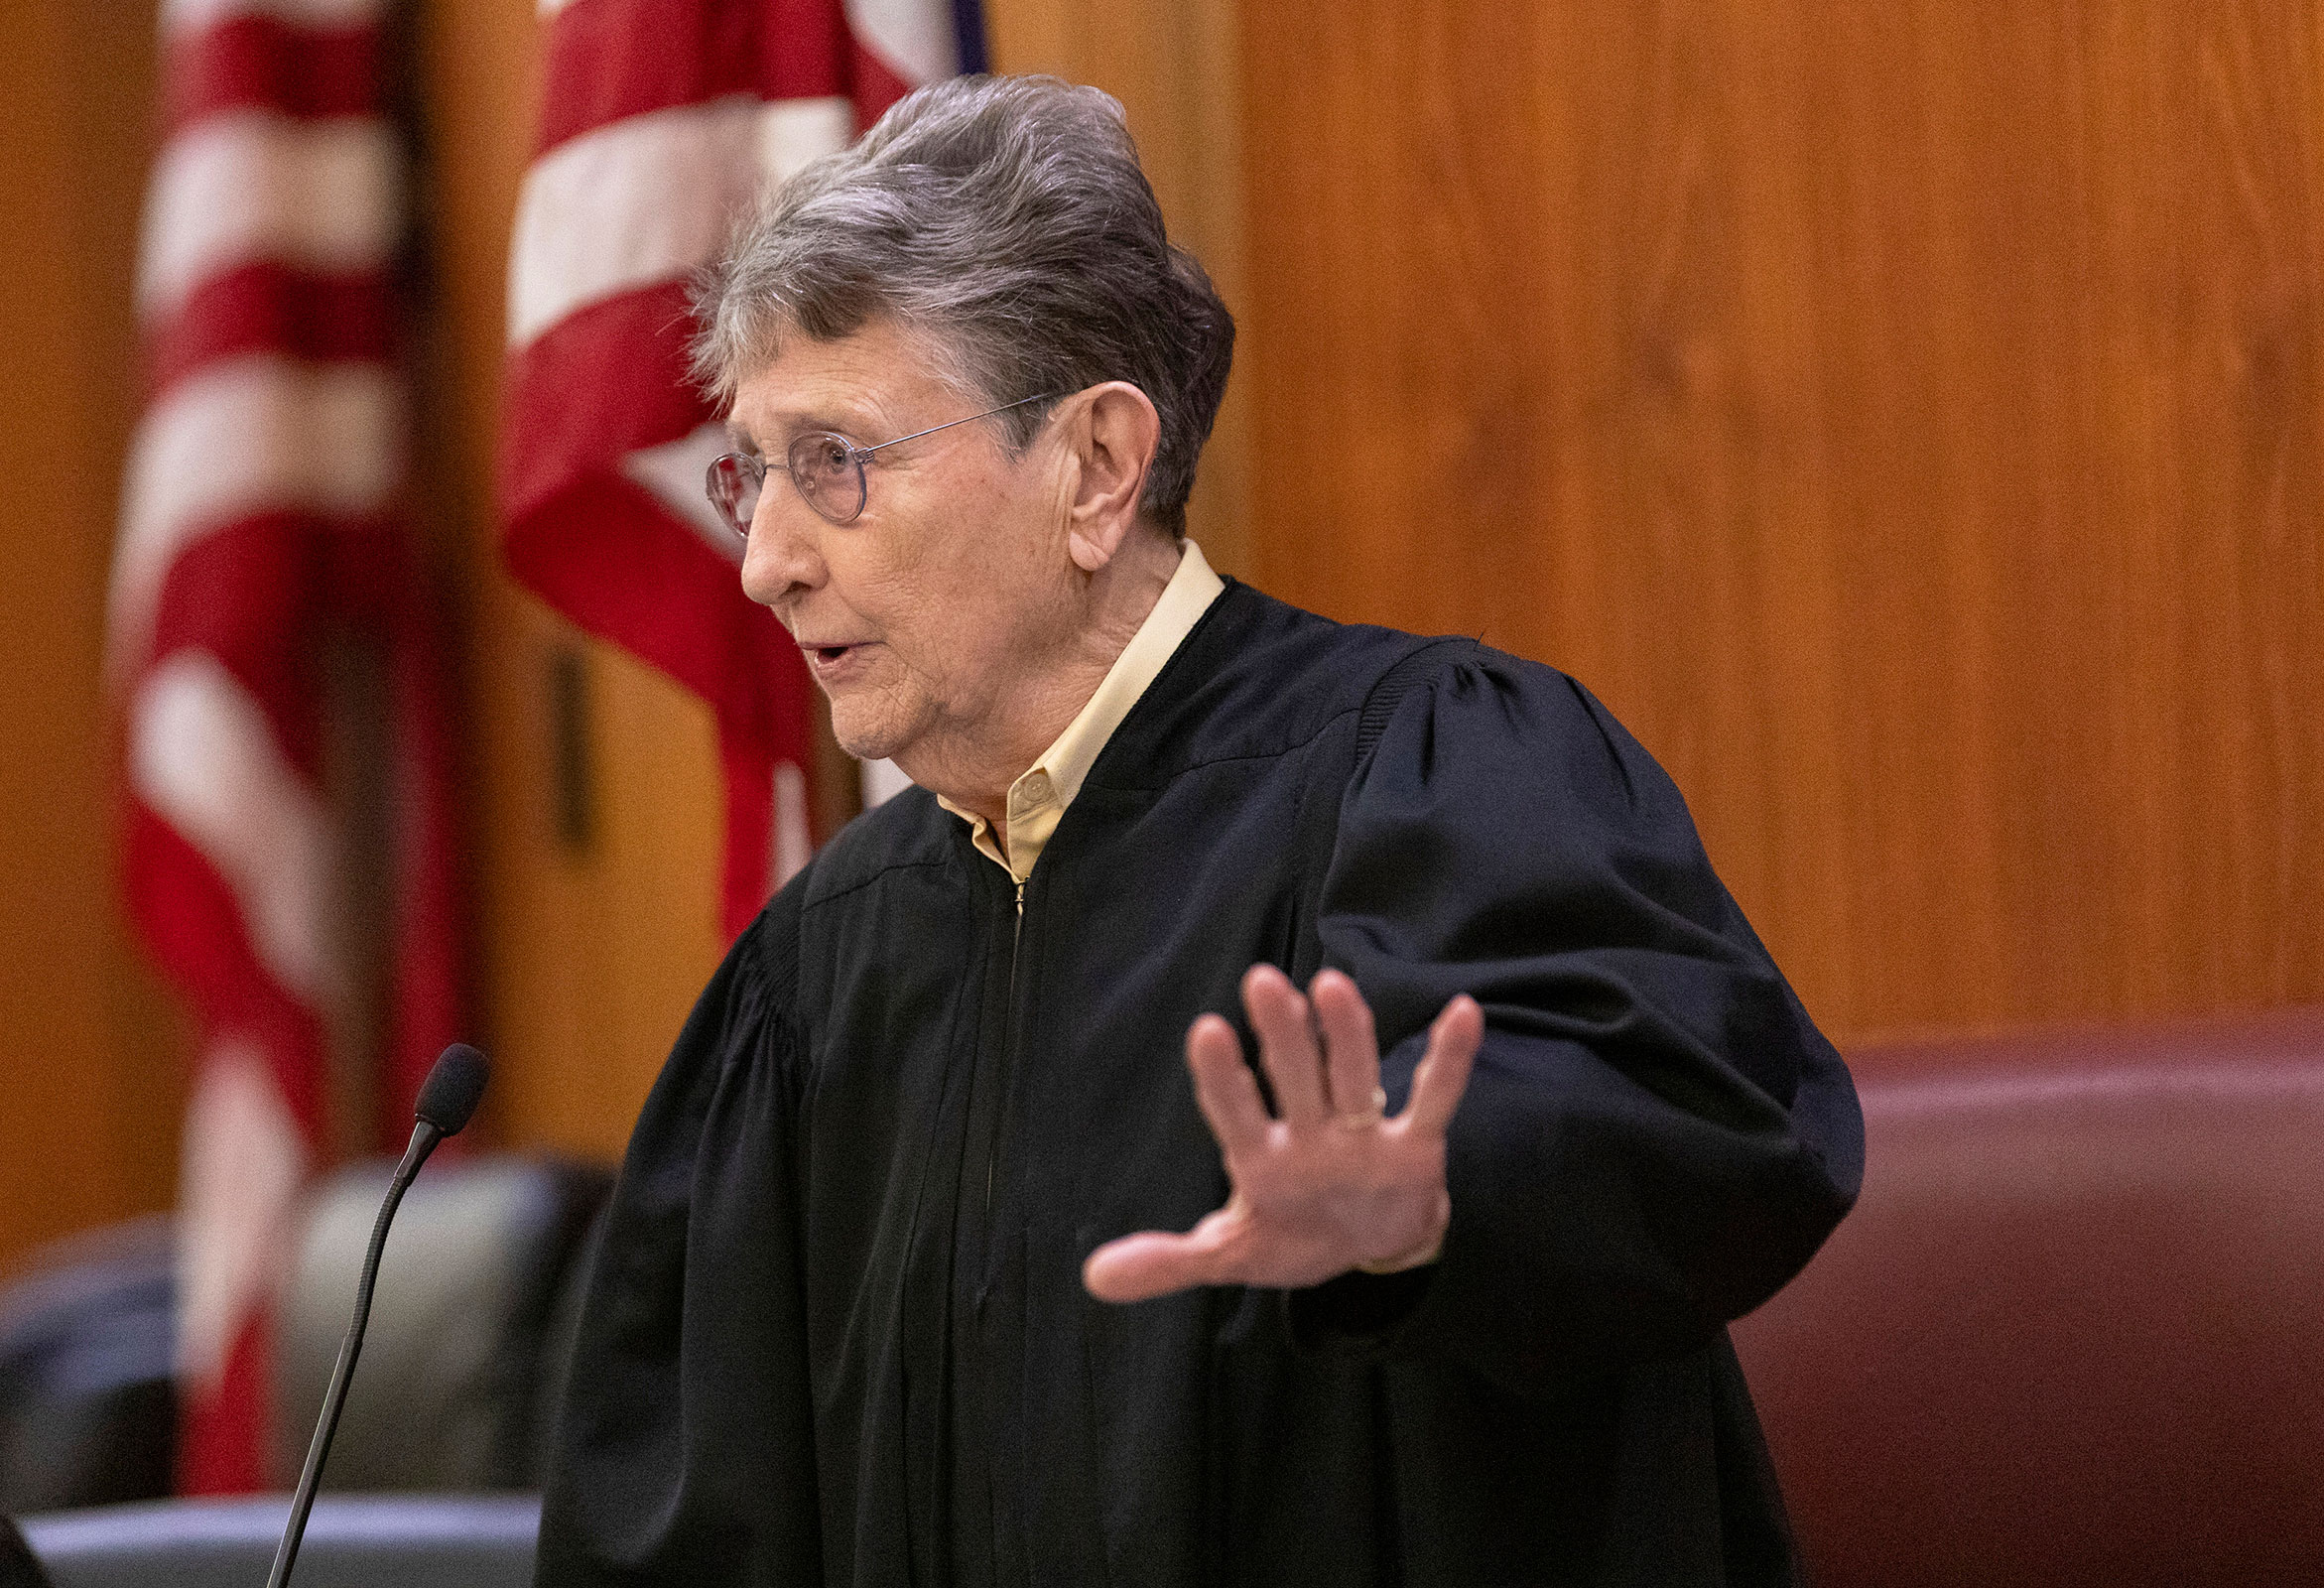 Judge Jean Toal talks to the court during the Alex Murdaugh jury-tampering hearing at the Richland County Judicial Center on Monday in Columbia, South Carolina.